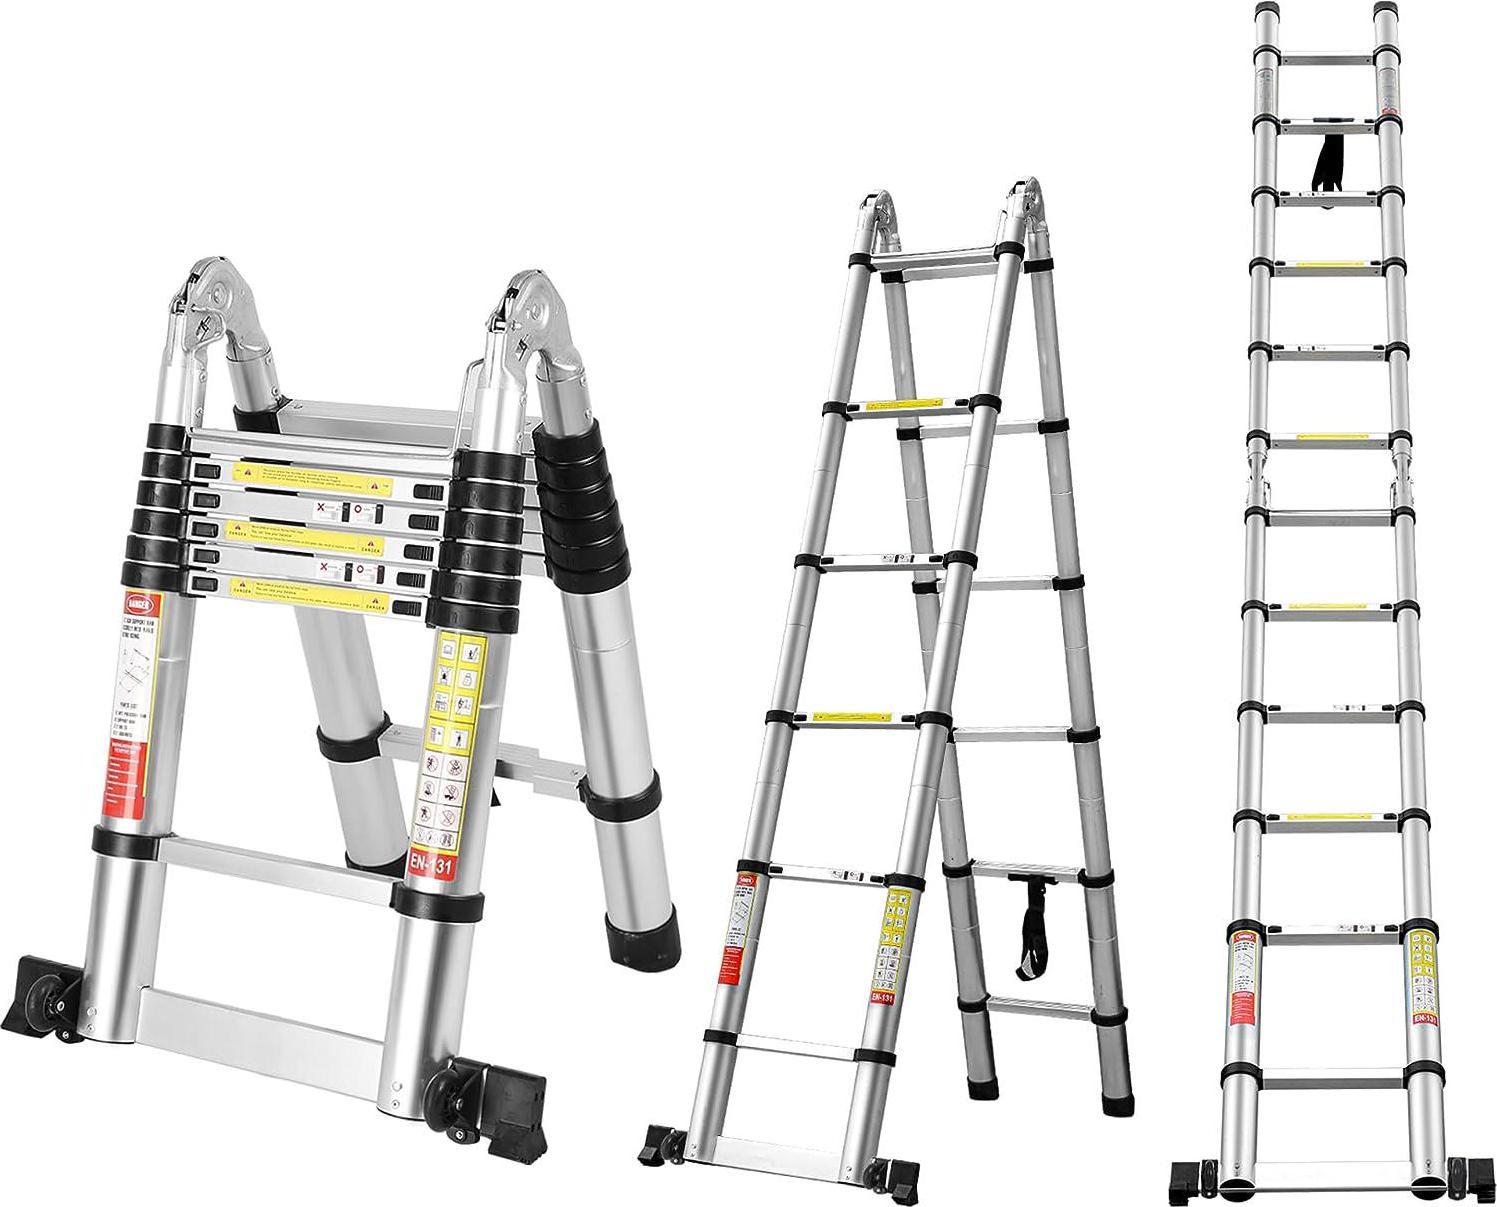 FEETE 12.5FT A Frame Telescoping Ladder, and similar items